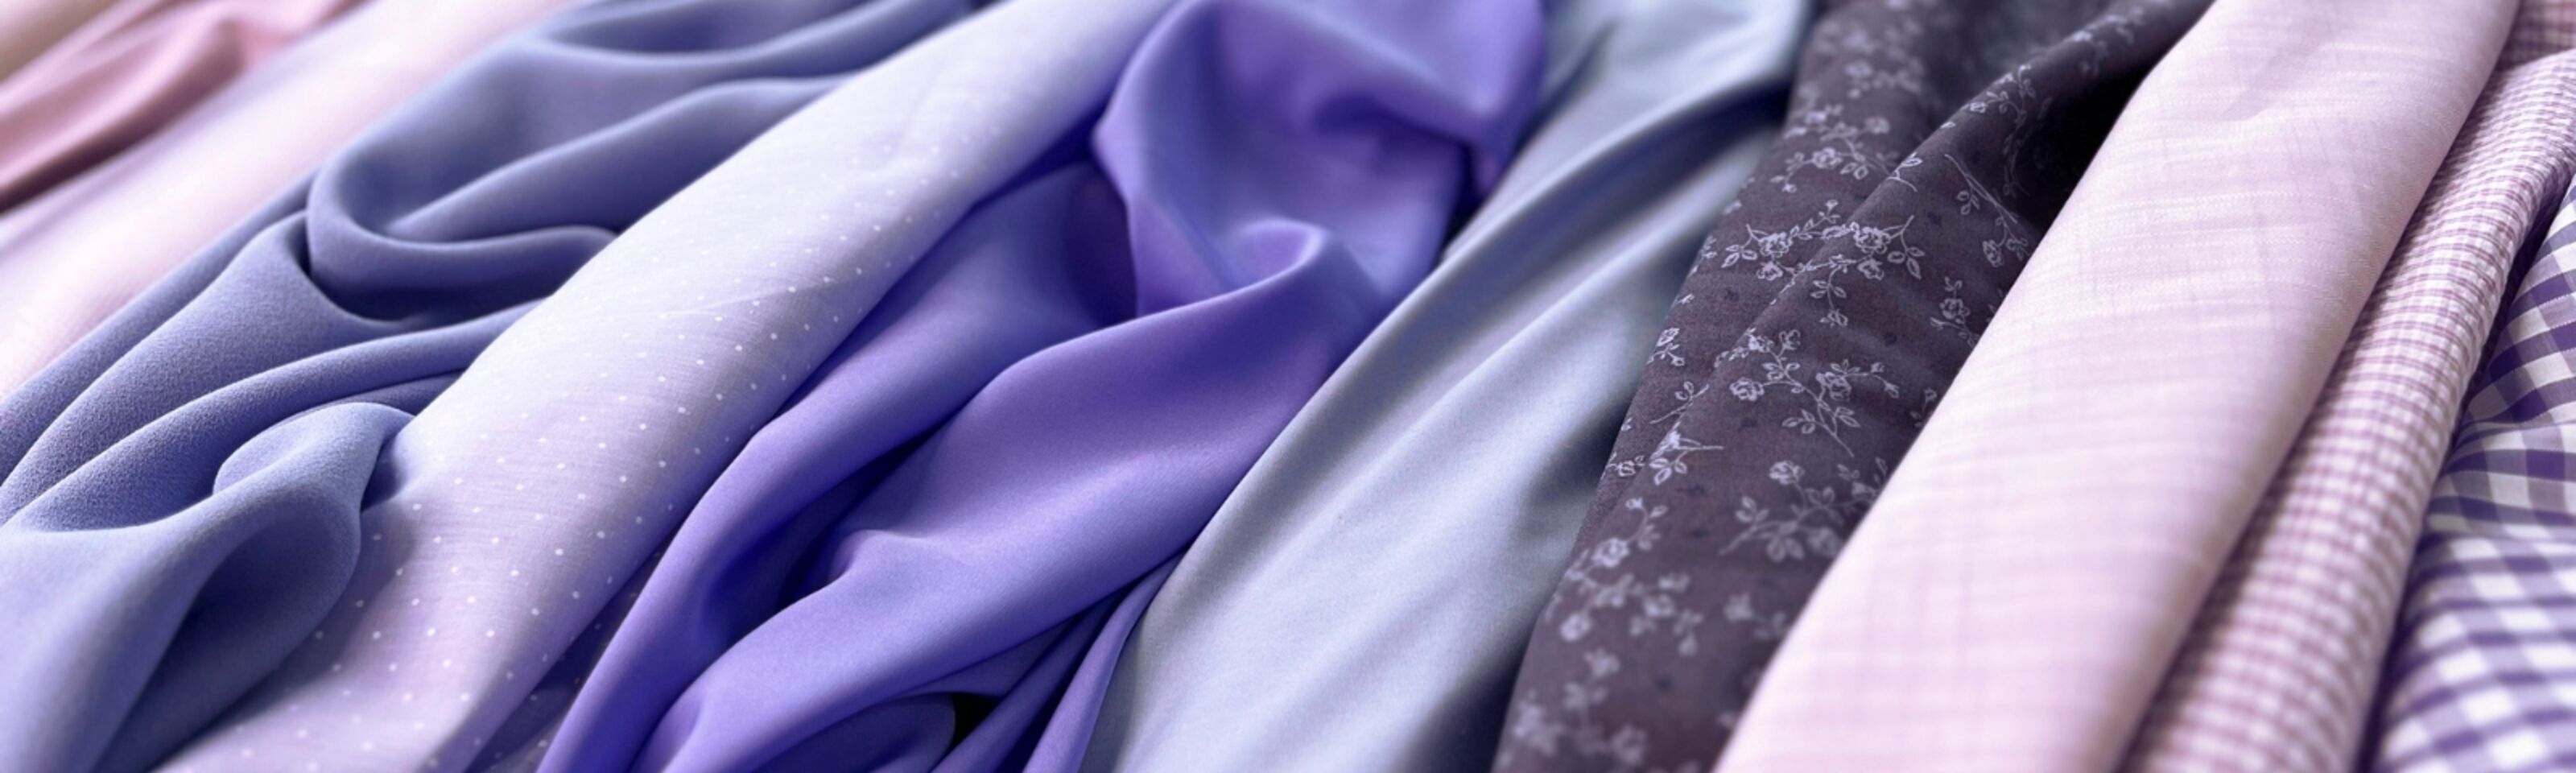 Power of Purple: Lavender and Lilac Fabric & Fashion Trends